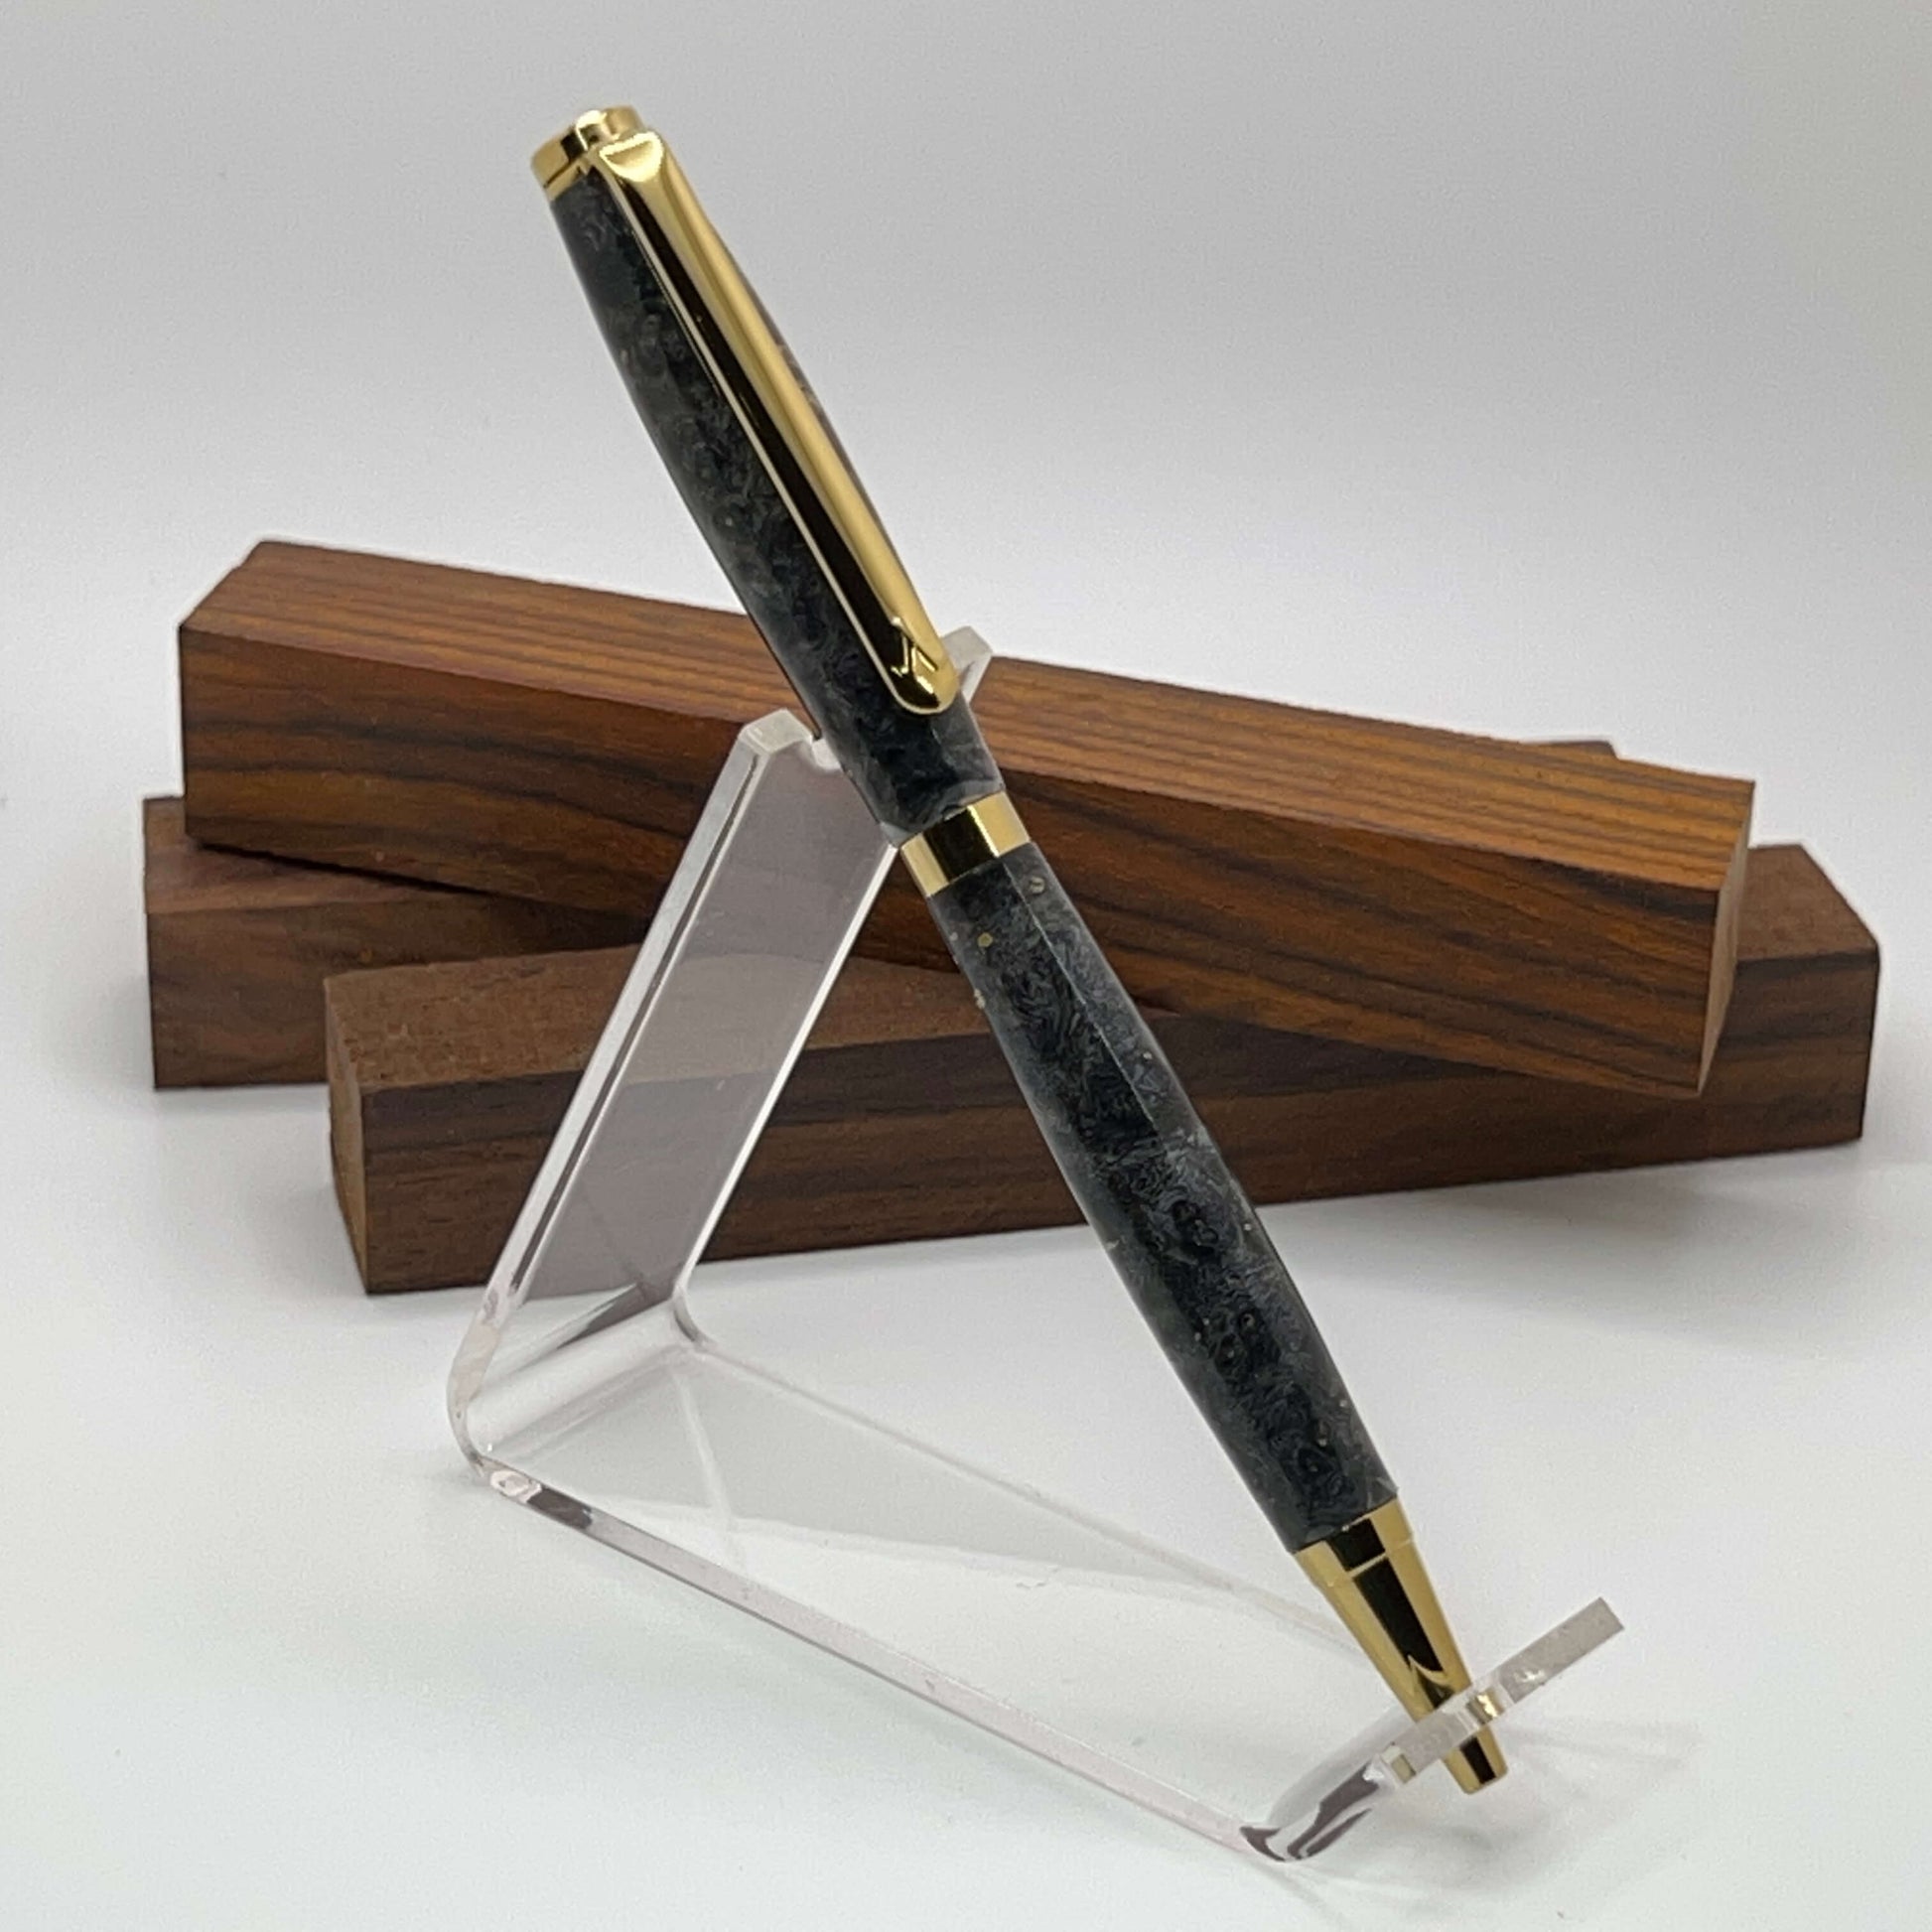 Handcrafted pen with Box Elder Burl wood dyed black and gold titanium hardware